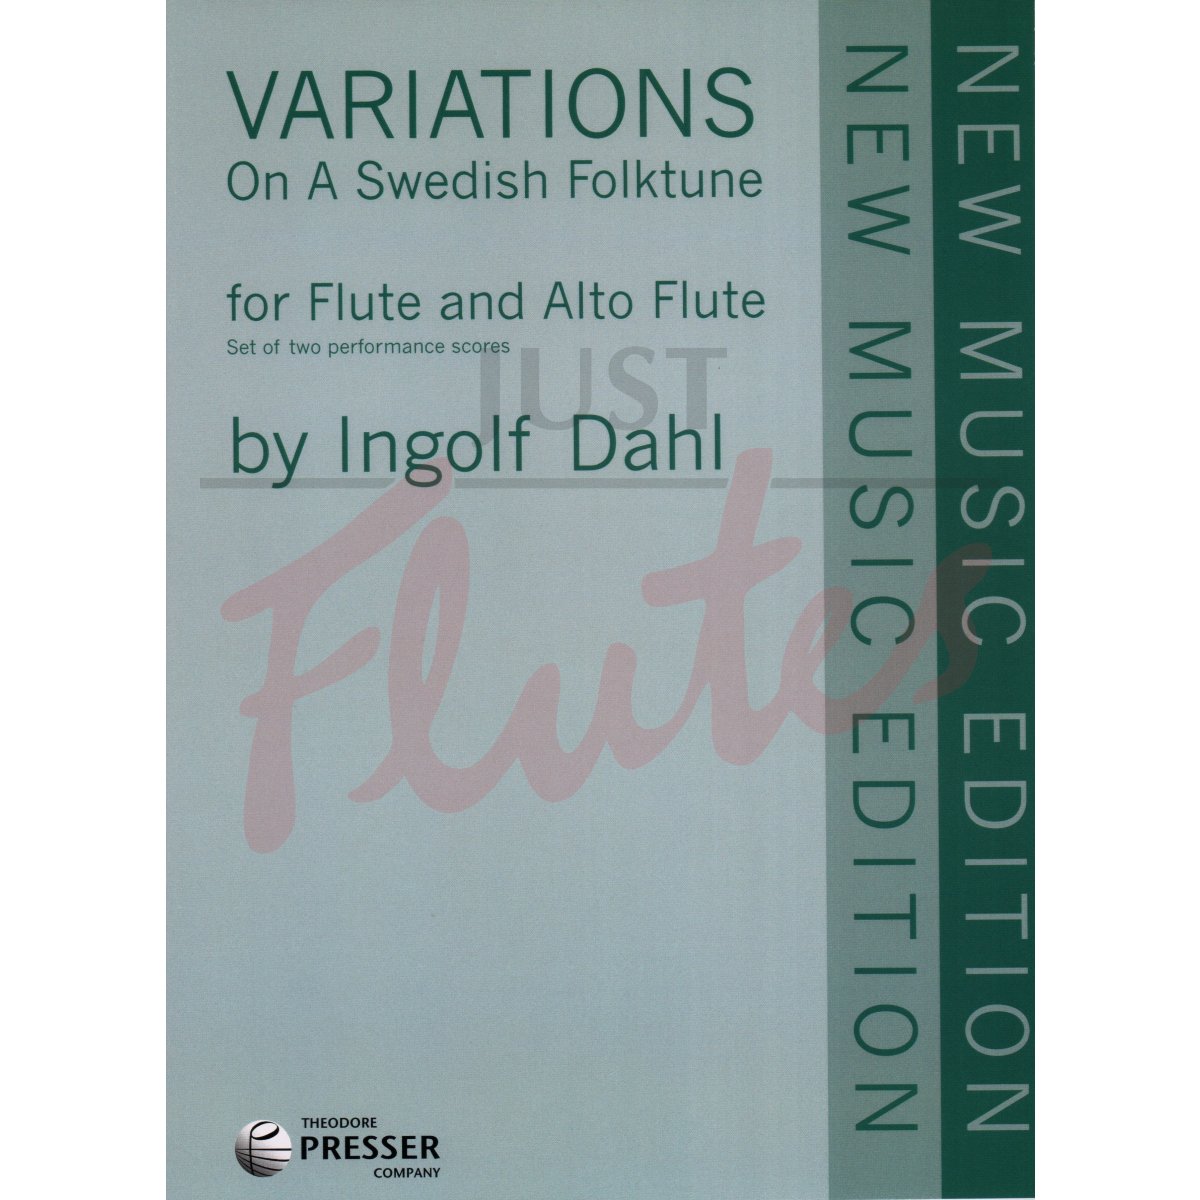 Variations on a Swedish Folktune for Flute and Alto Flute